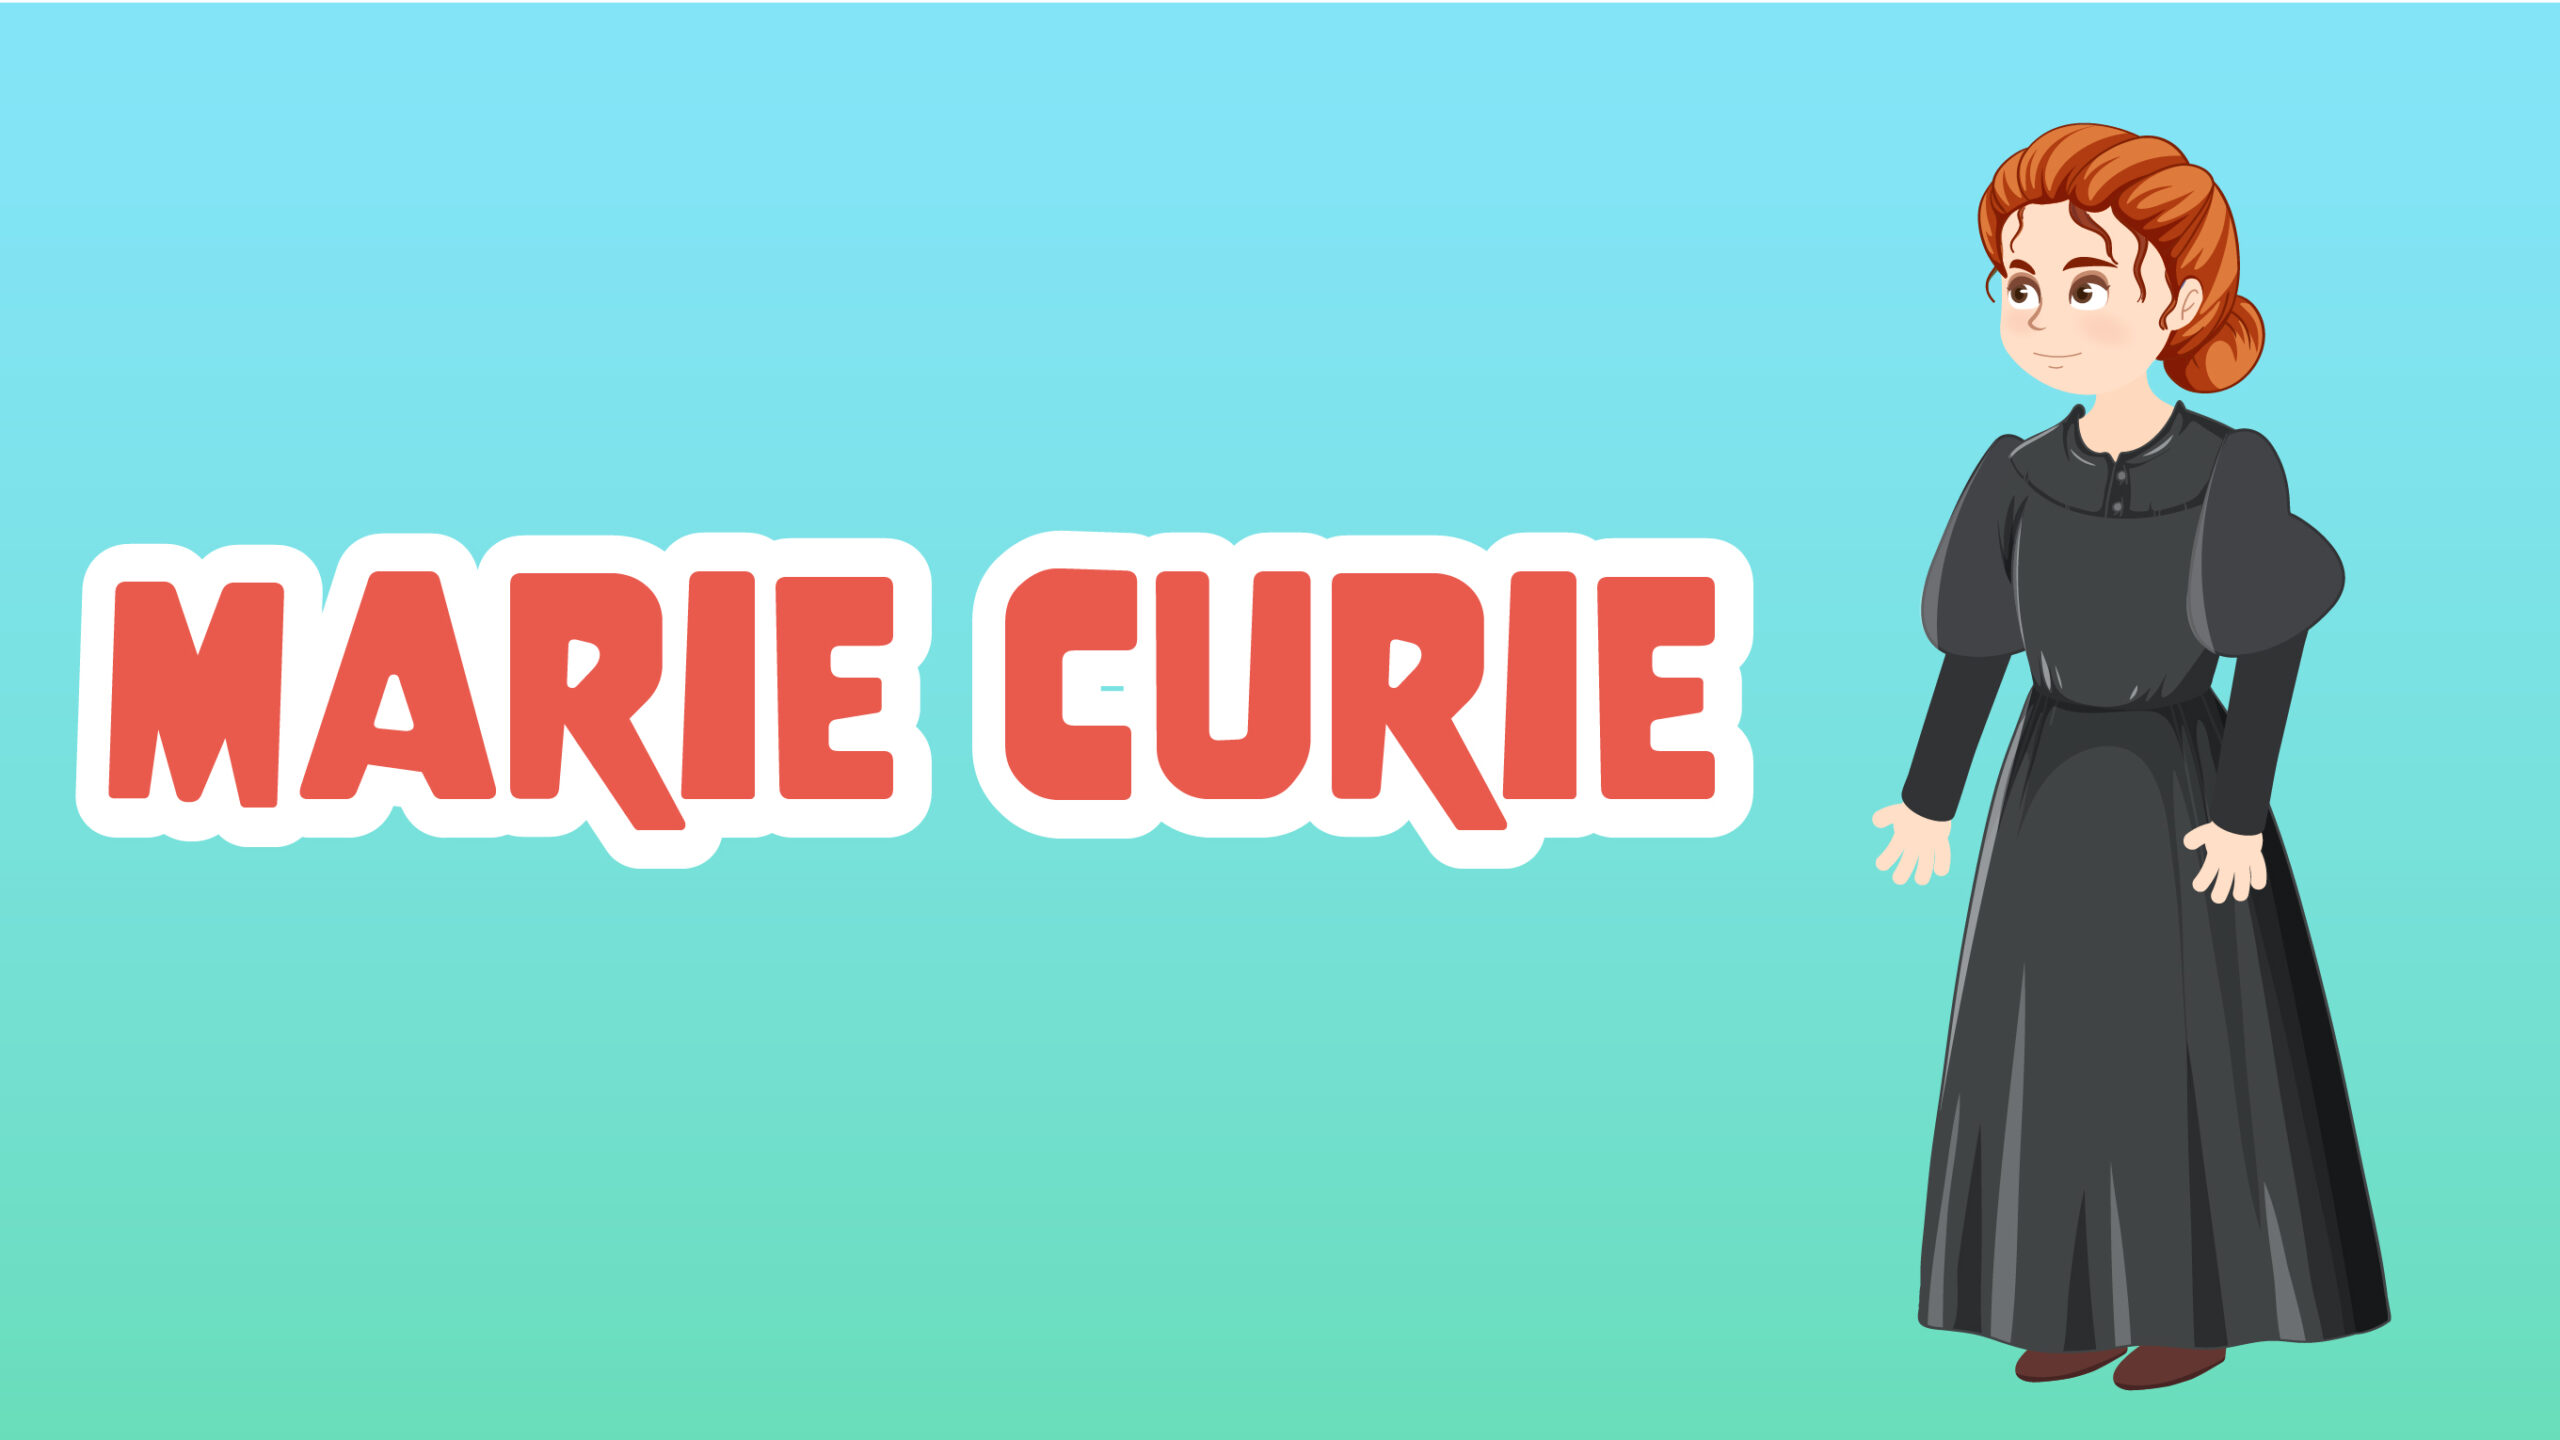 Marie Curie Facts for Kids – 5 Genius Facts about Marie Curie